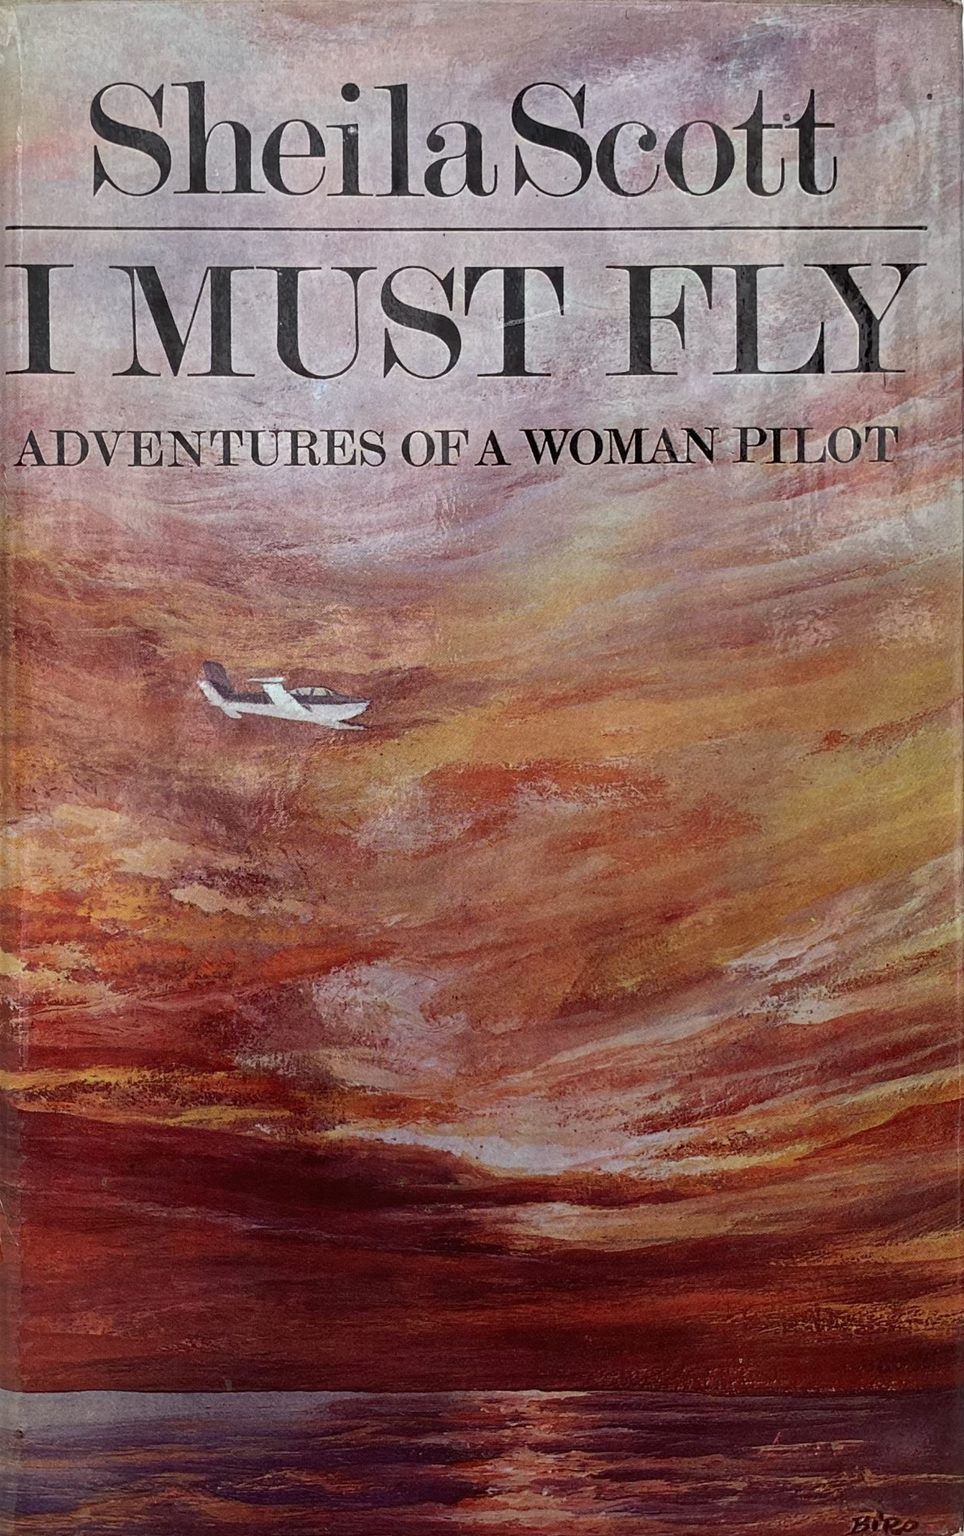 I MUST FLY: Adventures of a Woman Pilot